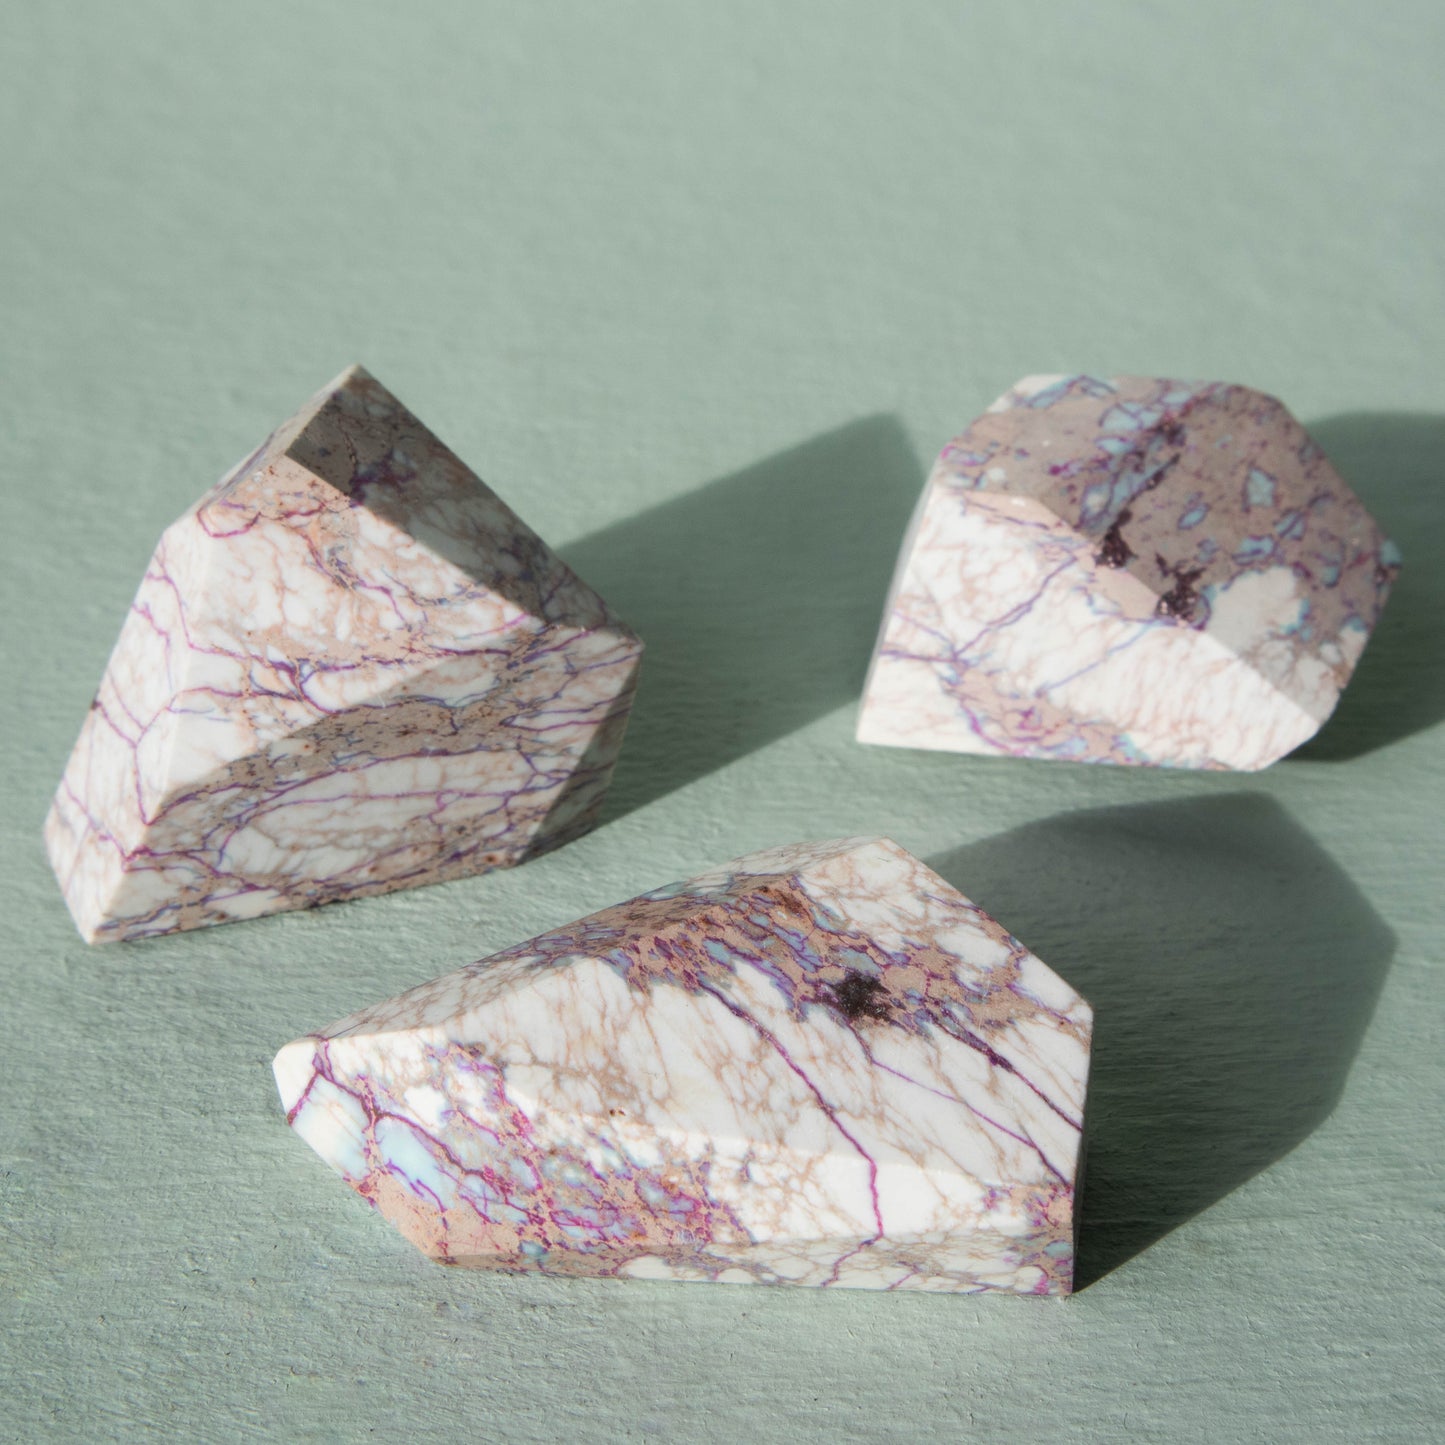 marble, magenta marble, marble crystal, marble stone, marble properties, marble metaphysical properties, marble meaning